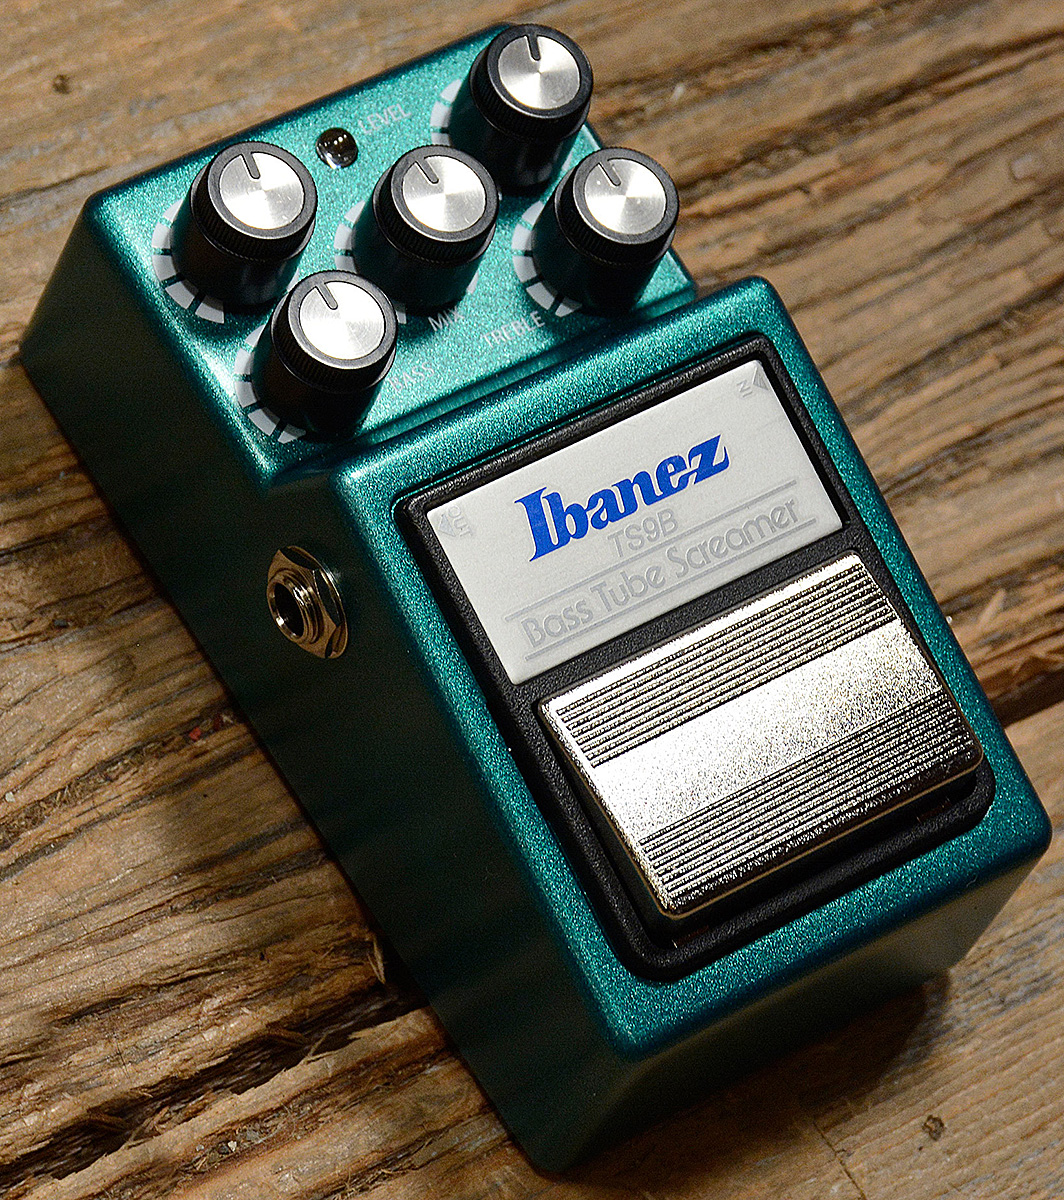 Ibanez Tube Screamer Ts9b Bass - Overdrive, distortion, fuzz effect pedal for bass - Variation 1